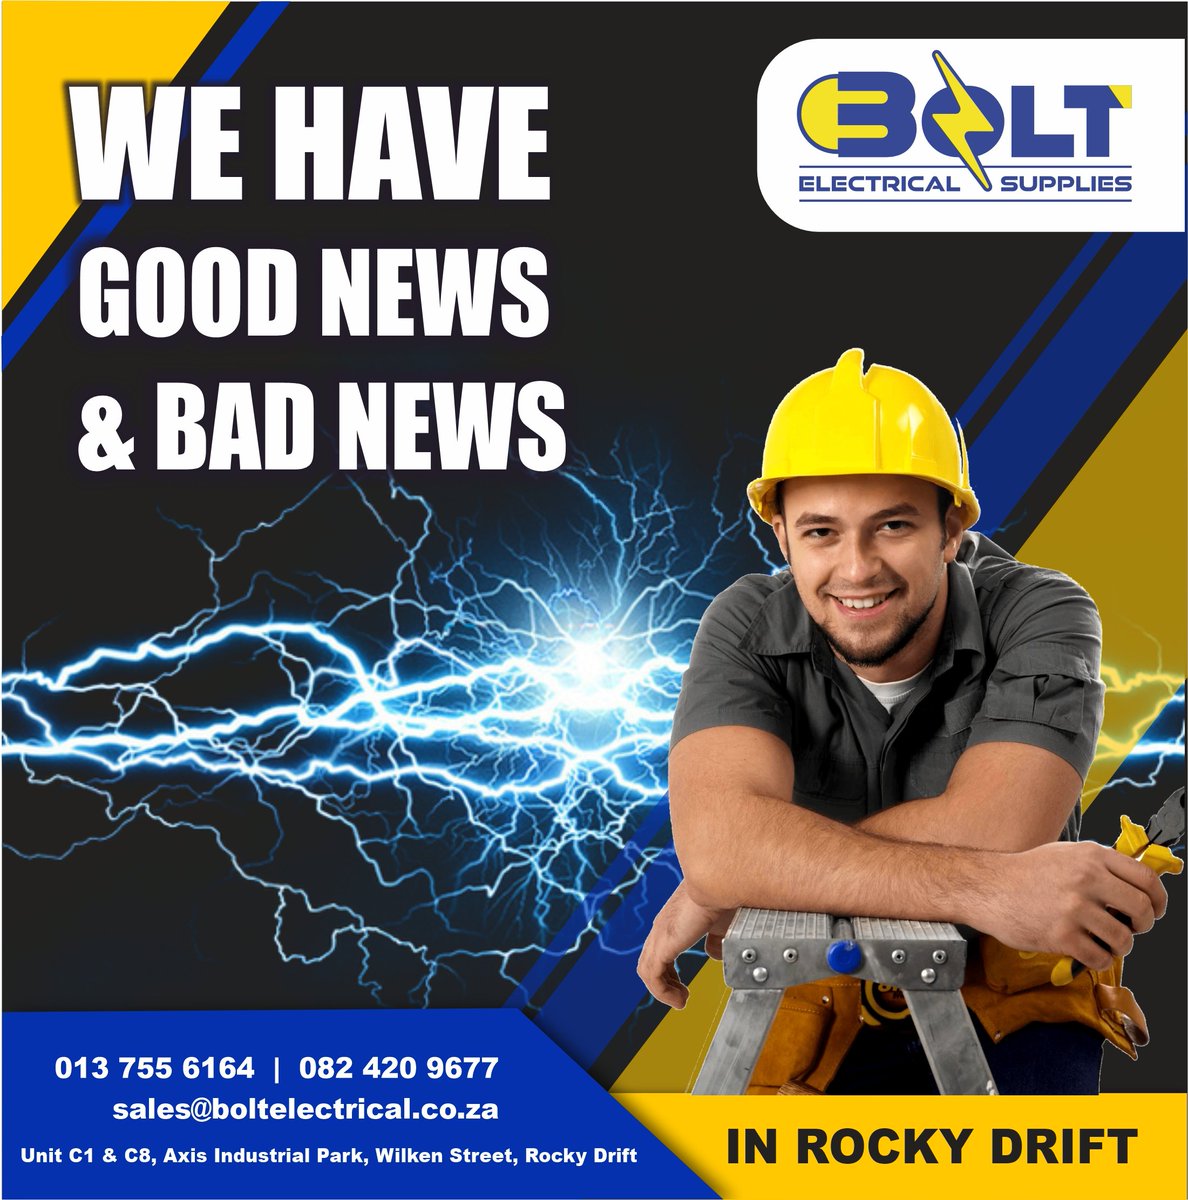 Load shedding is predicted to stay with us for the next two years. That’s the bad news.
Office: 013 755 6164 

#boltelectrical #solarenergy #hashtagonline
#electricity #electrical #electrician #energy #power #electric #electricians #electricalengineering #electricianlife